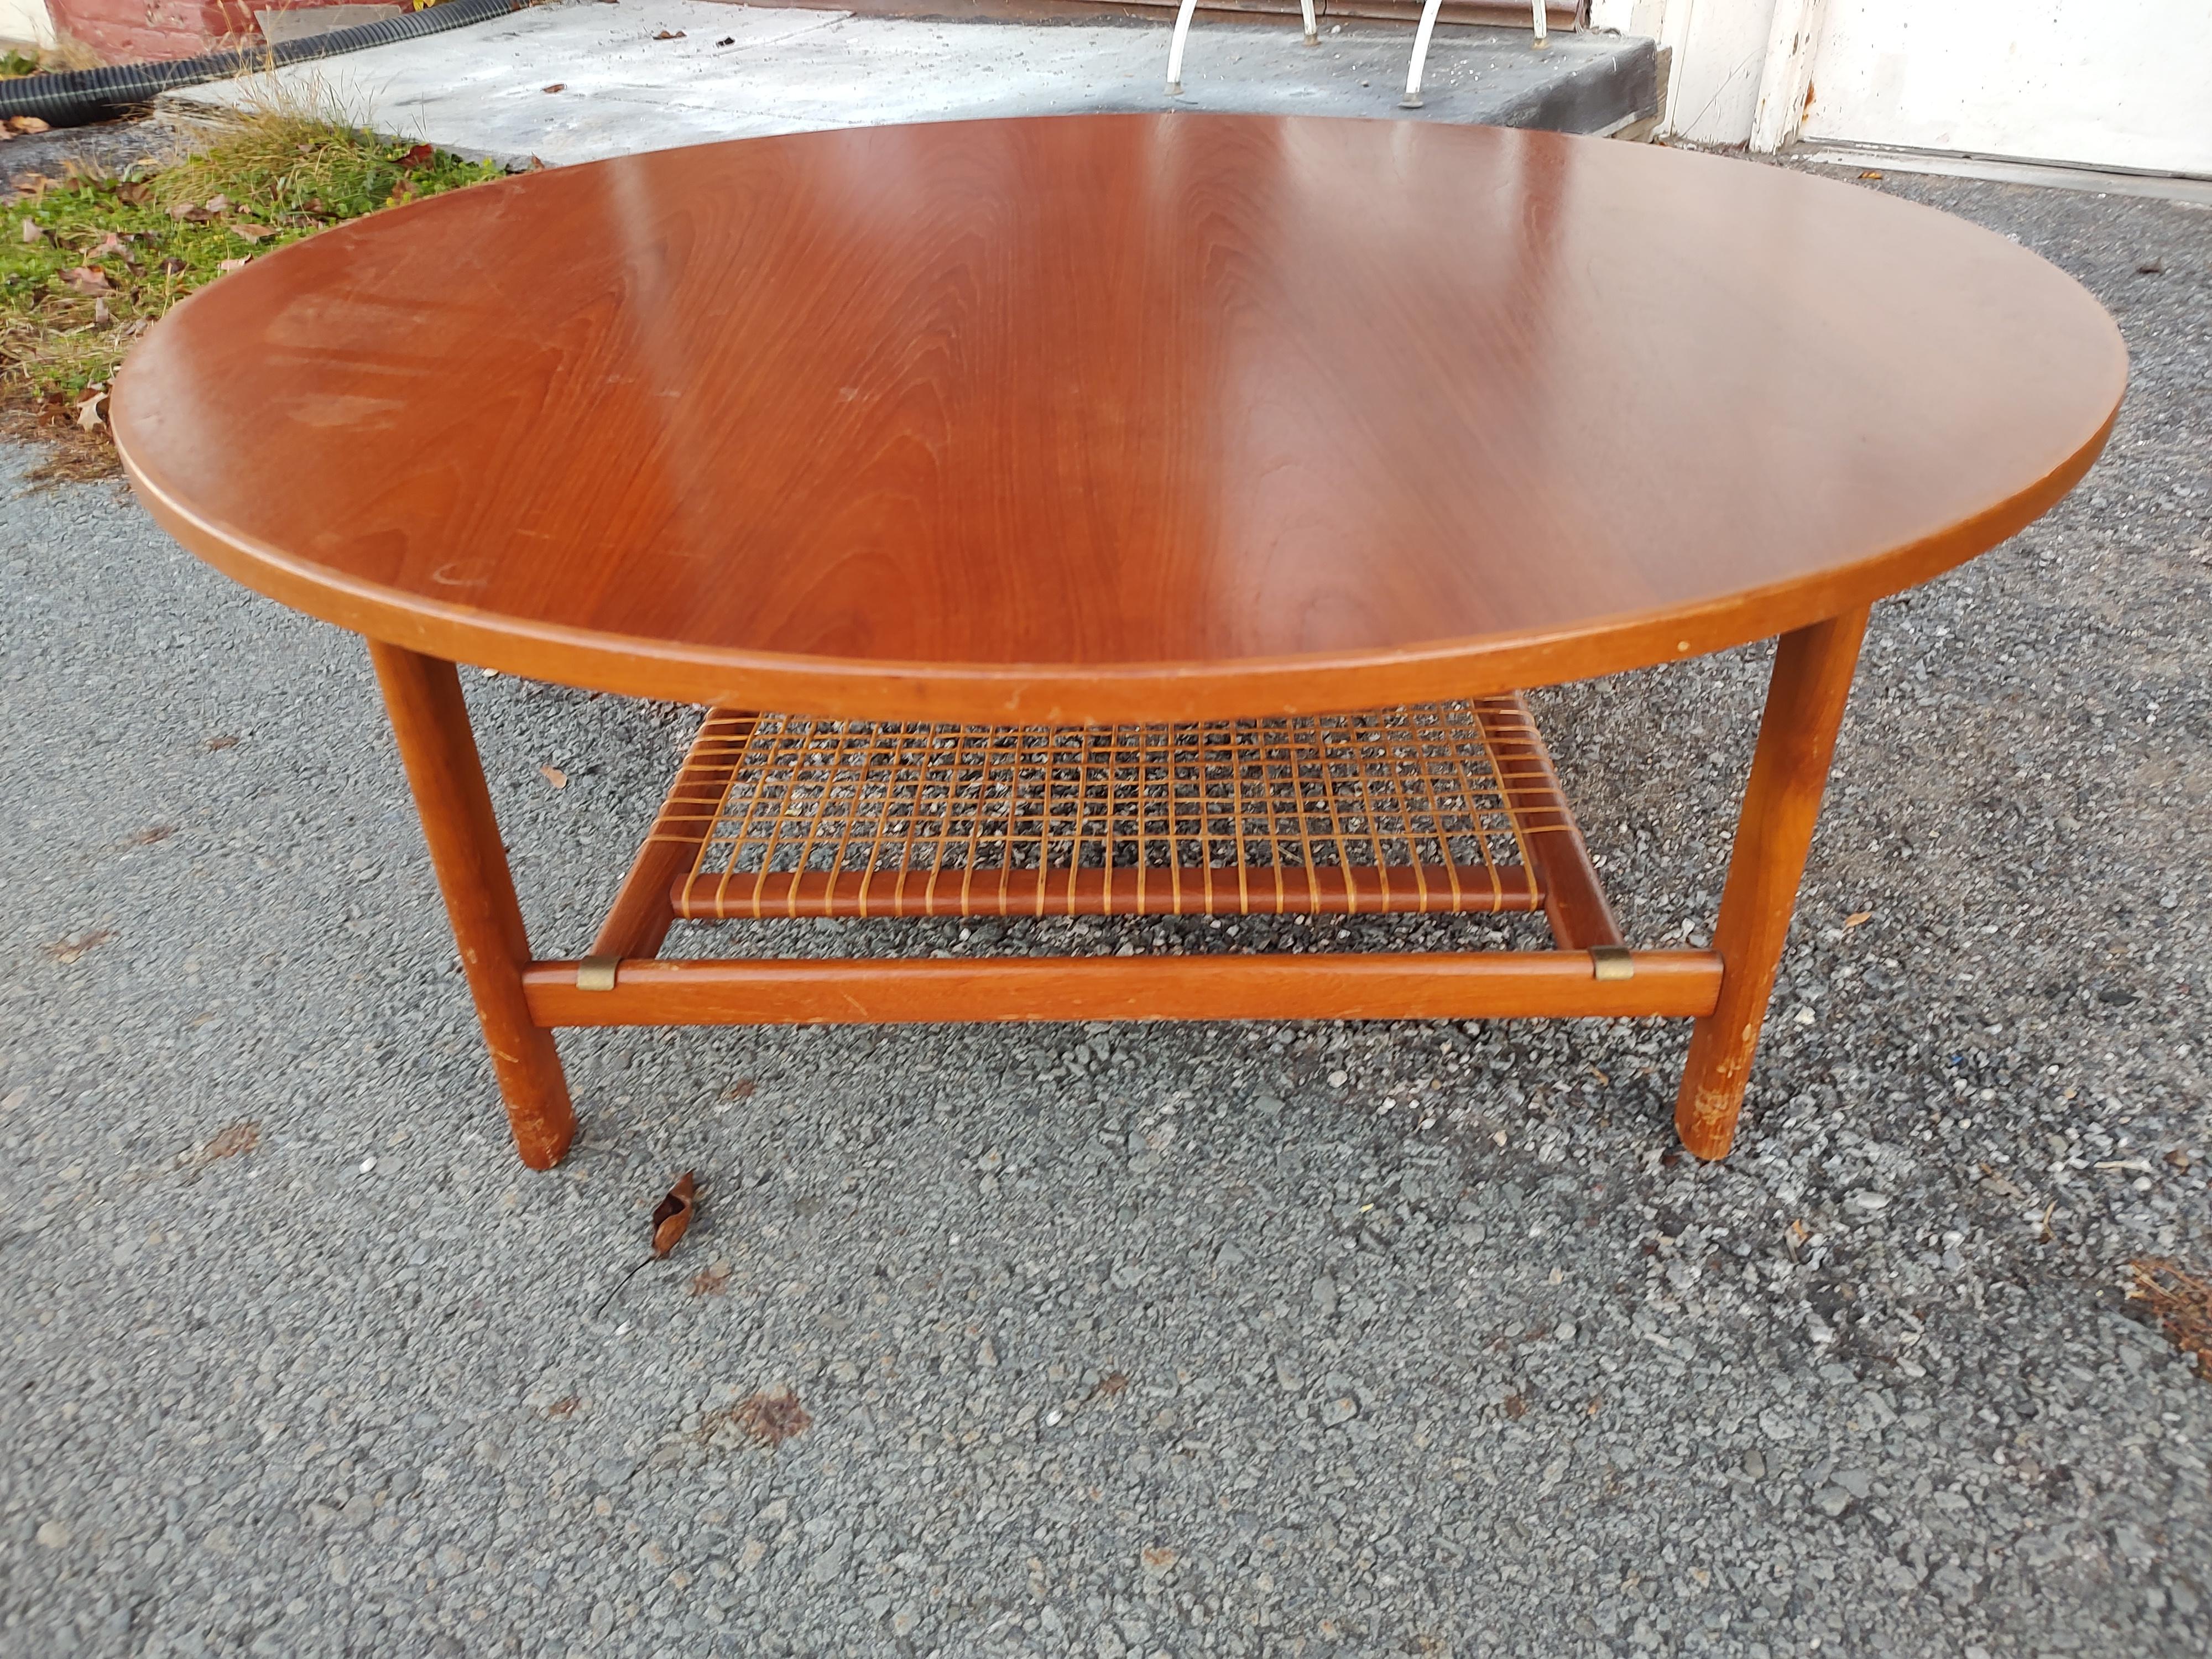 Swedish Mid-Century Modern Teak with Woven Shelf Cocktail Table by Dux Sweden For Sale